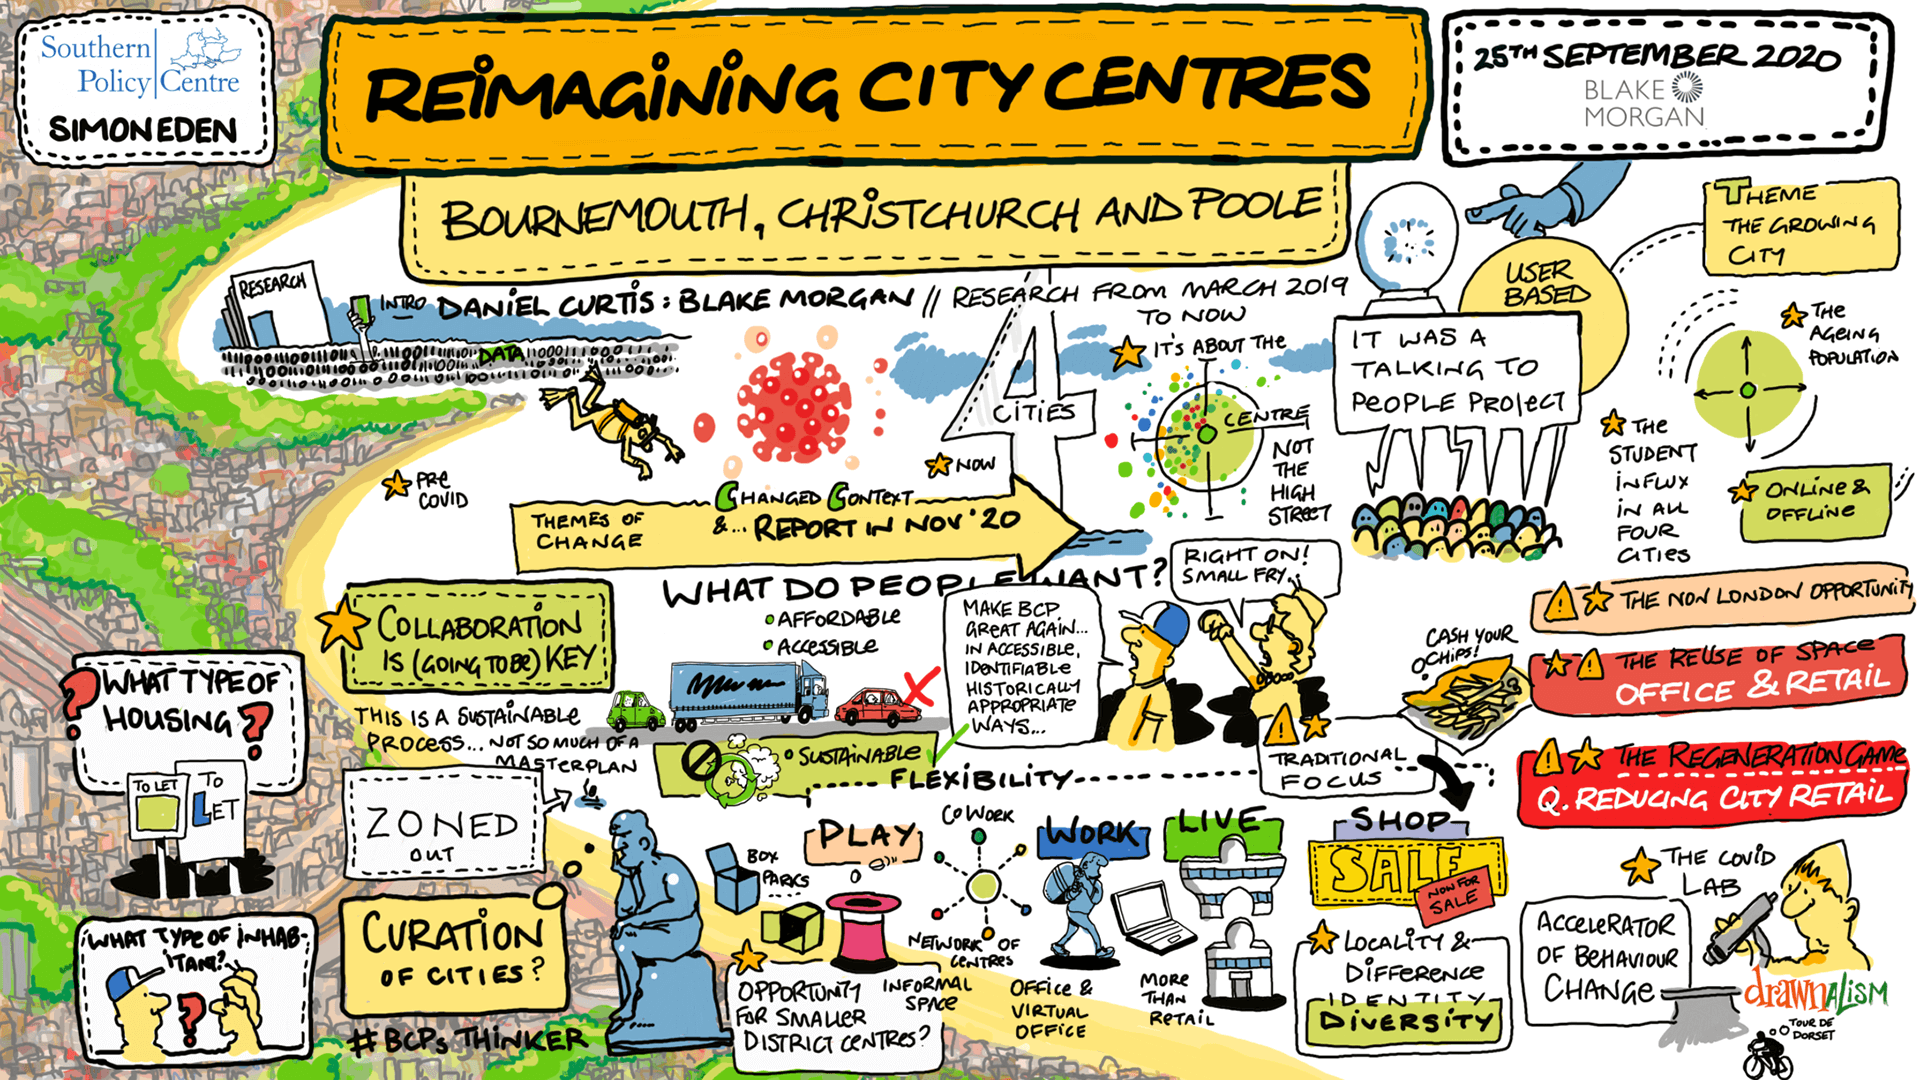 Reimagining City Centres - Bournemouth, Christchurch and Poole